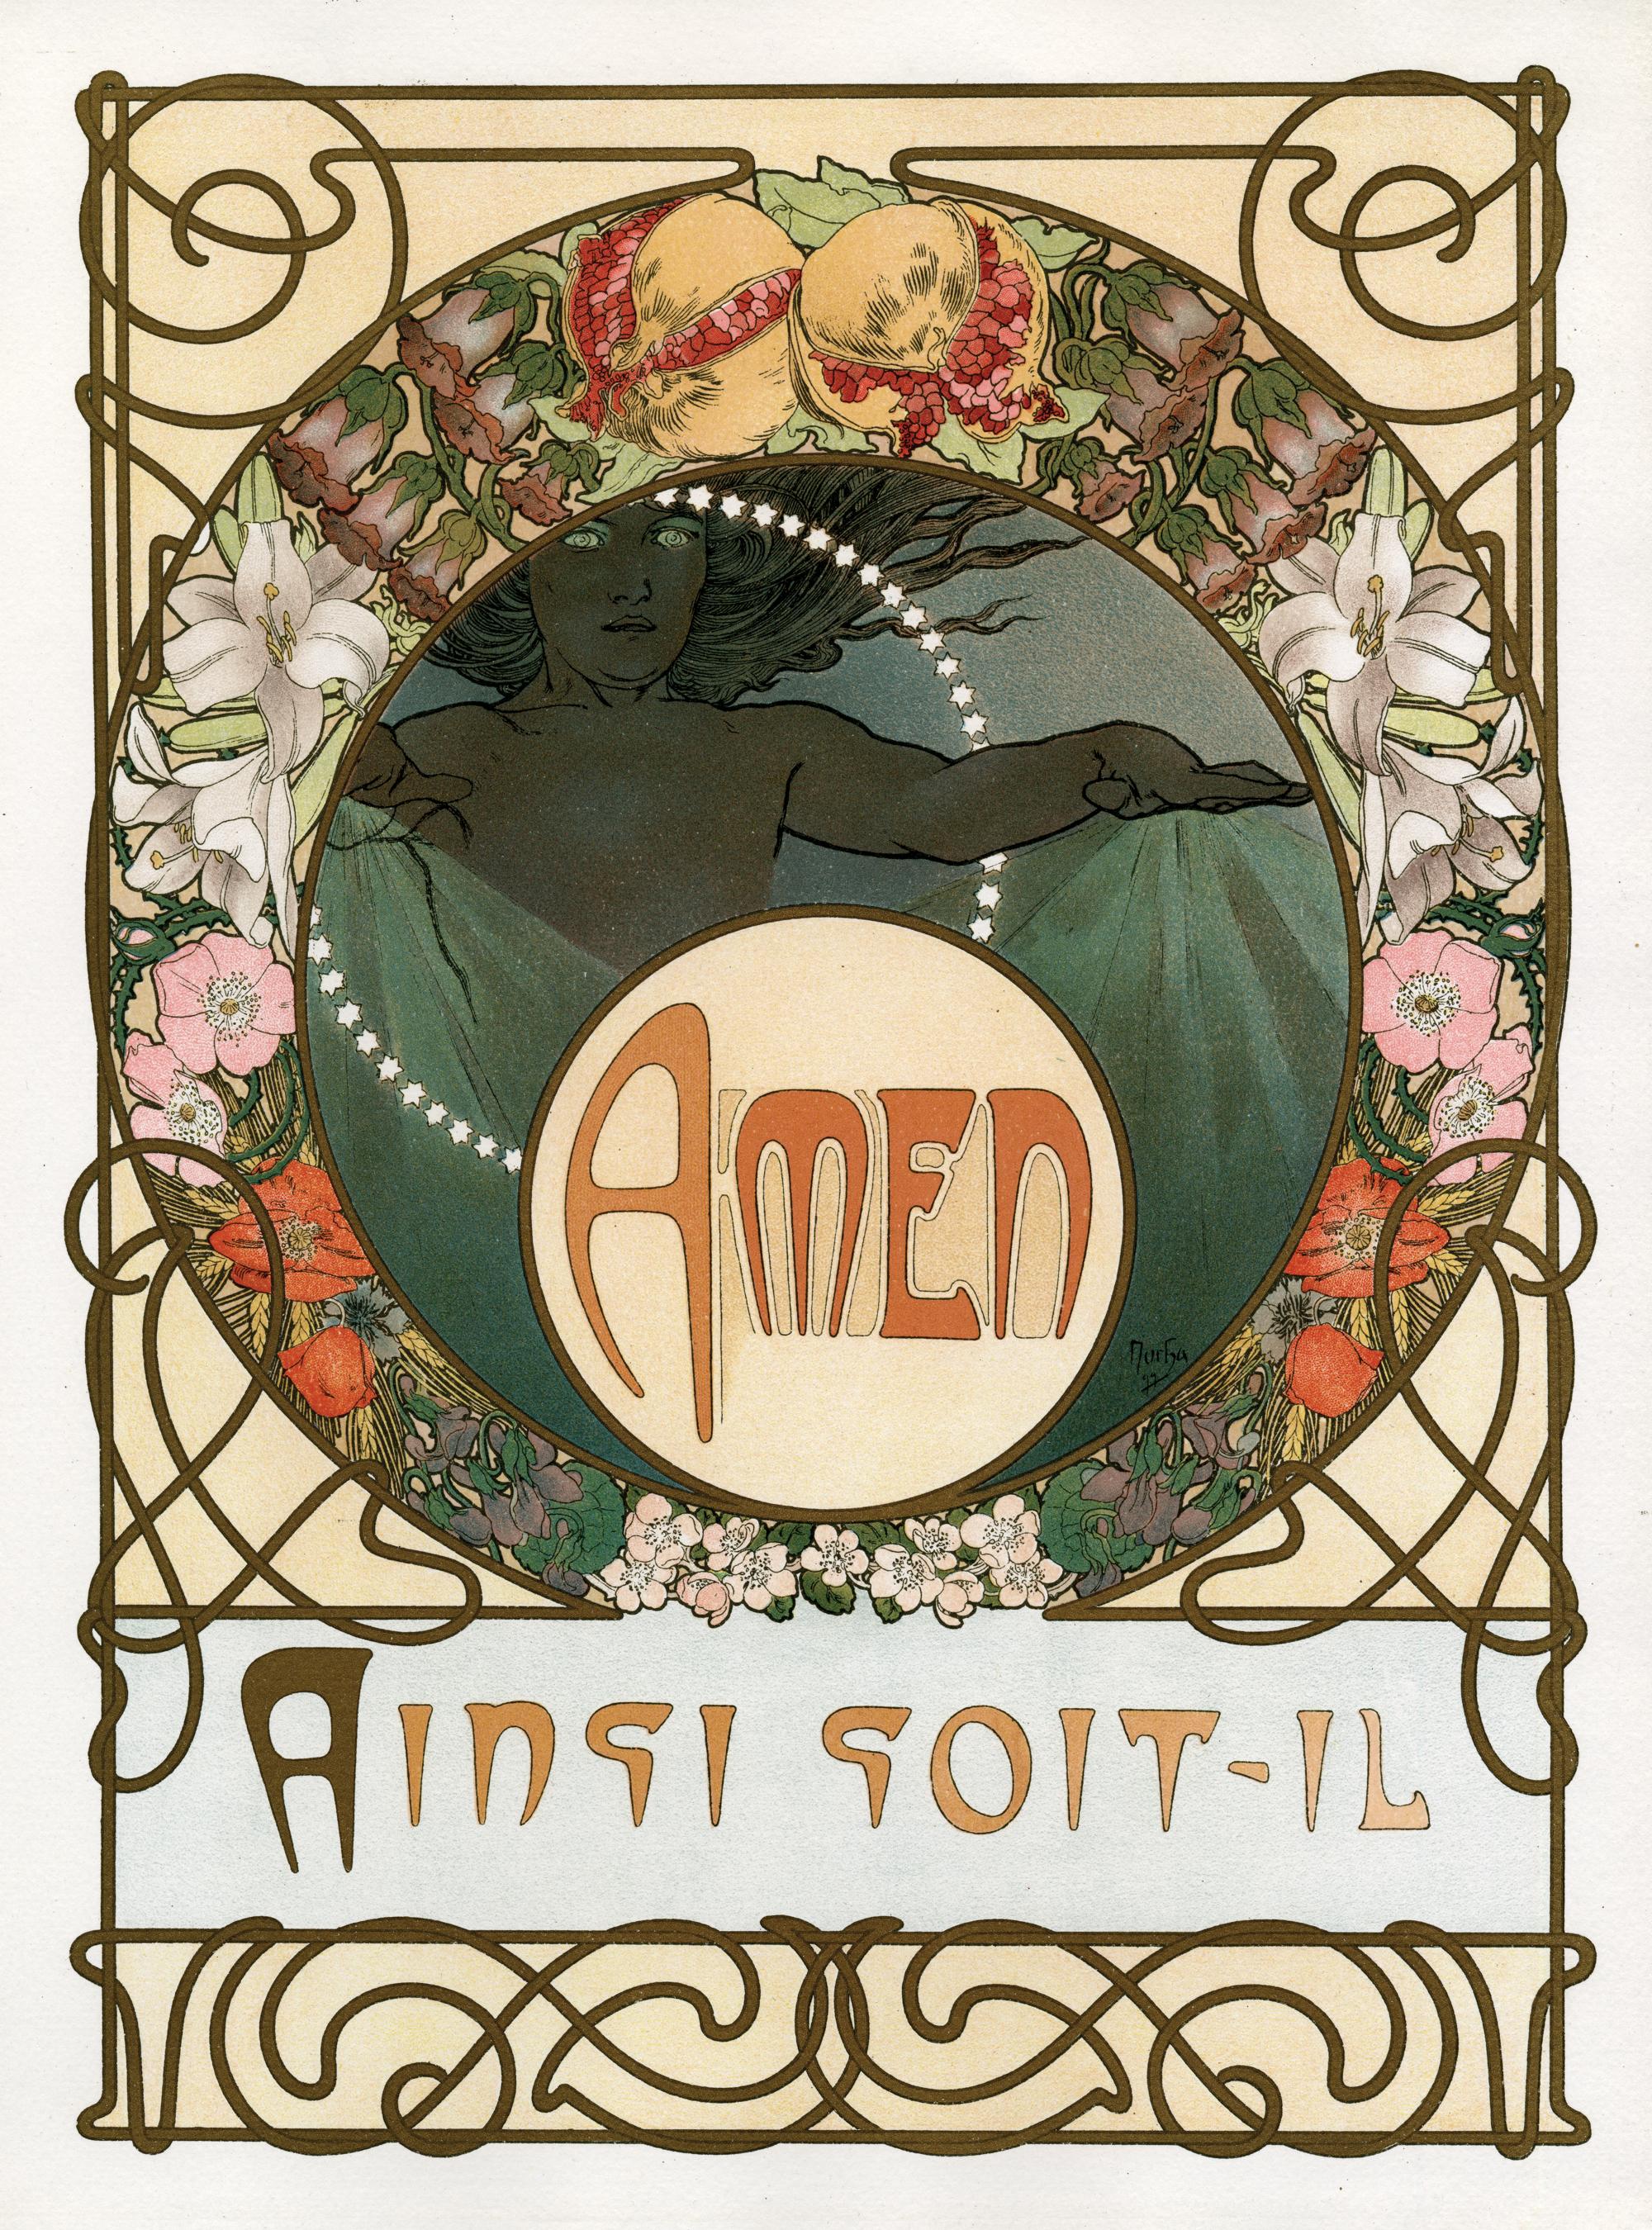 What is Mucha’s style?